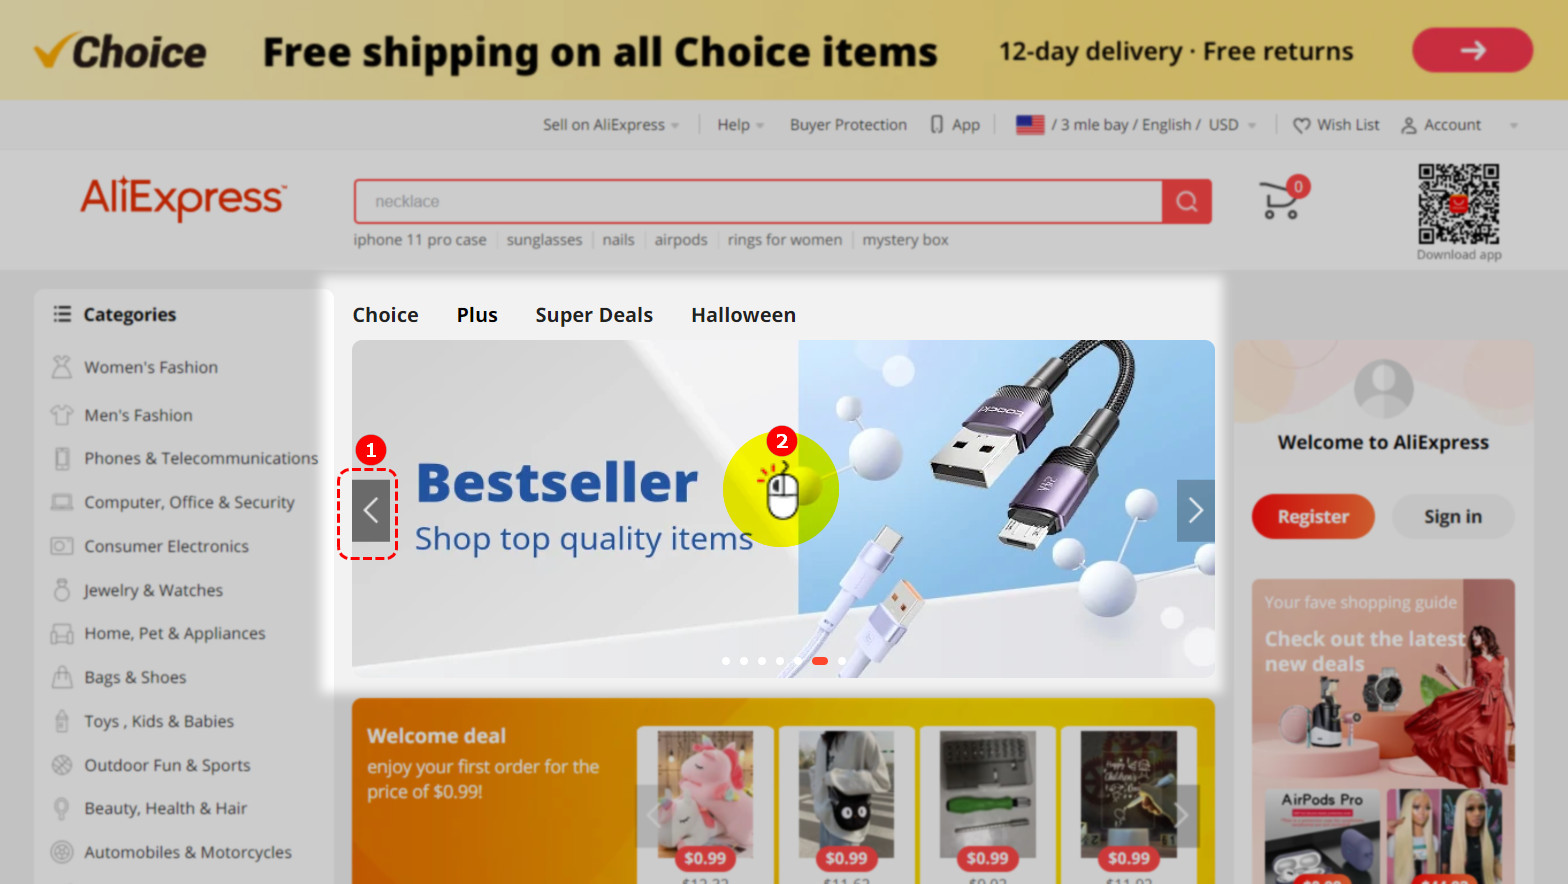 aliexpress best seller products